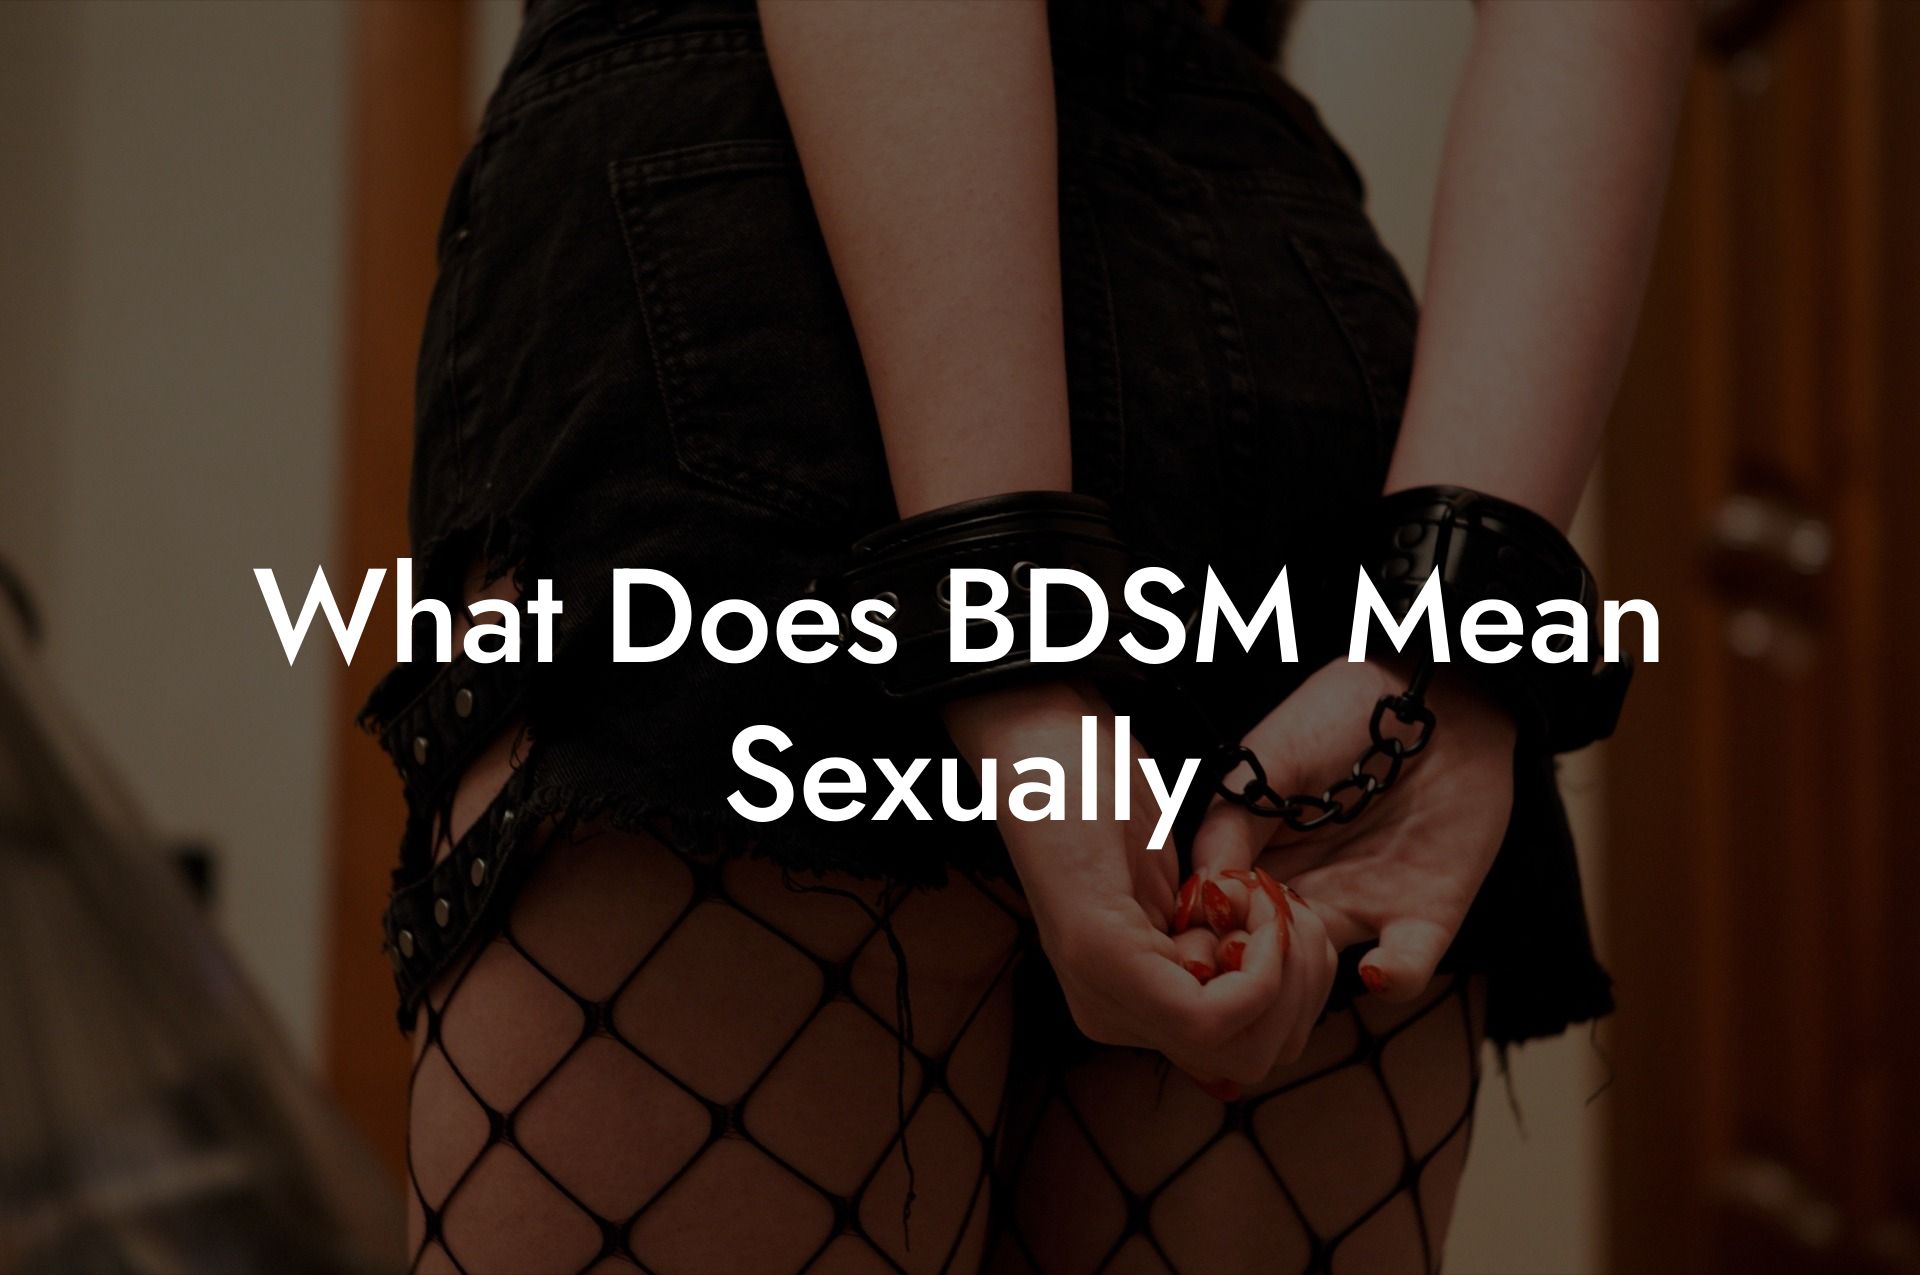 What Does BDSM Mean Sexually